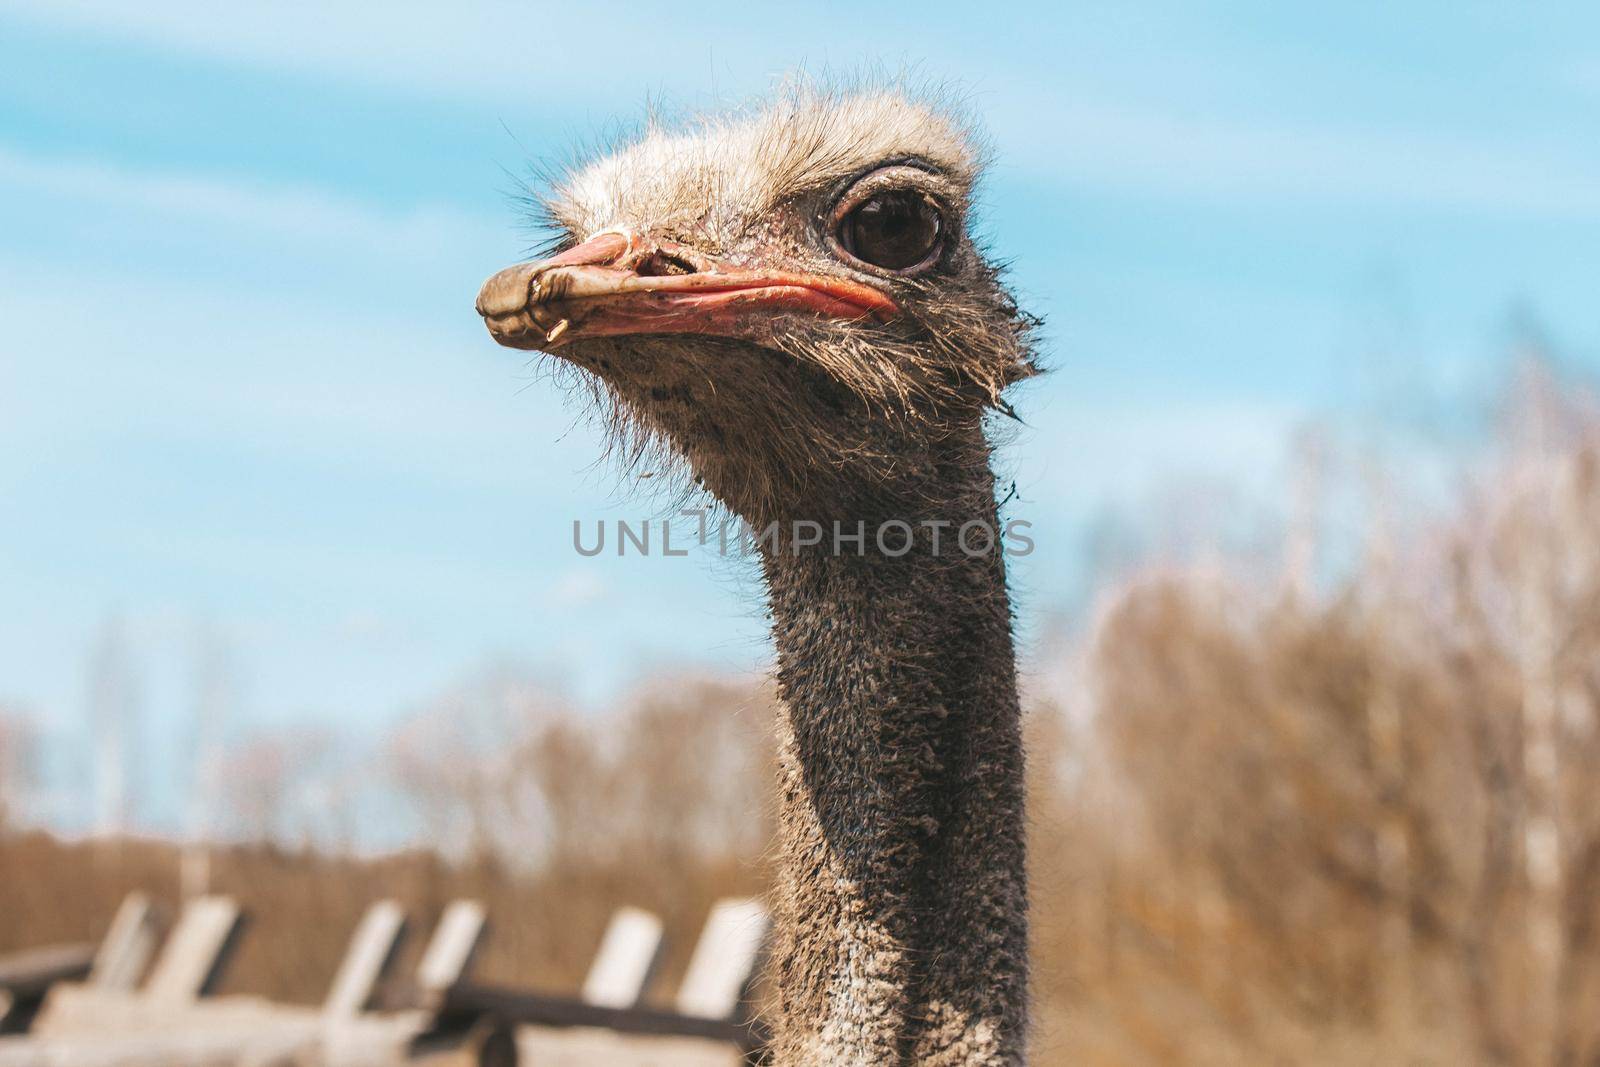 Ostrich head shot close-up on the background of the forest and sky by grekoni